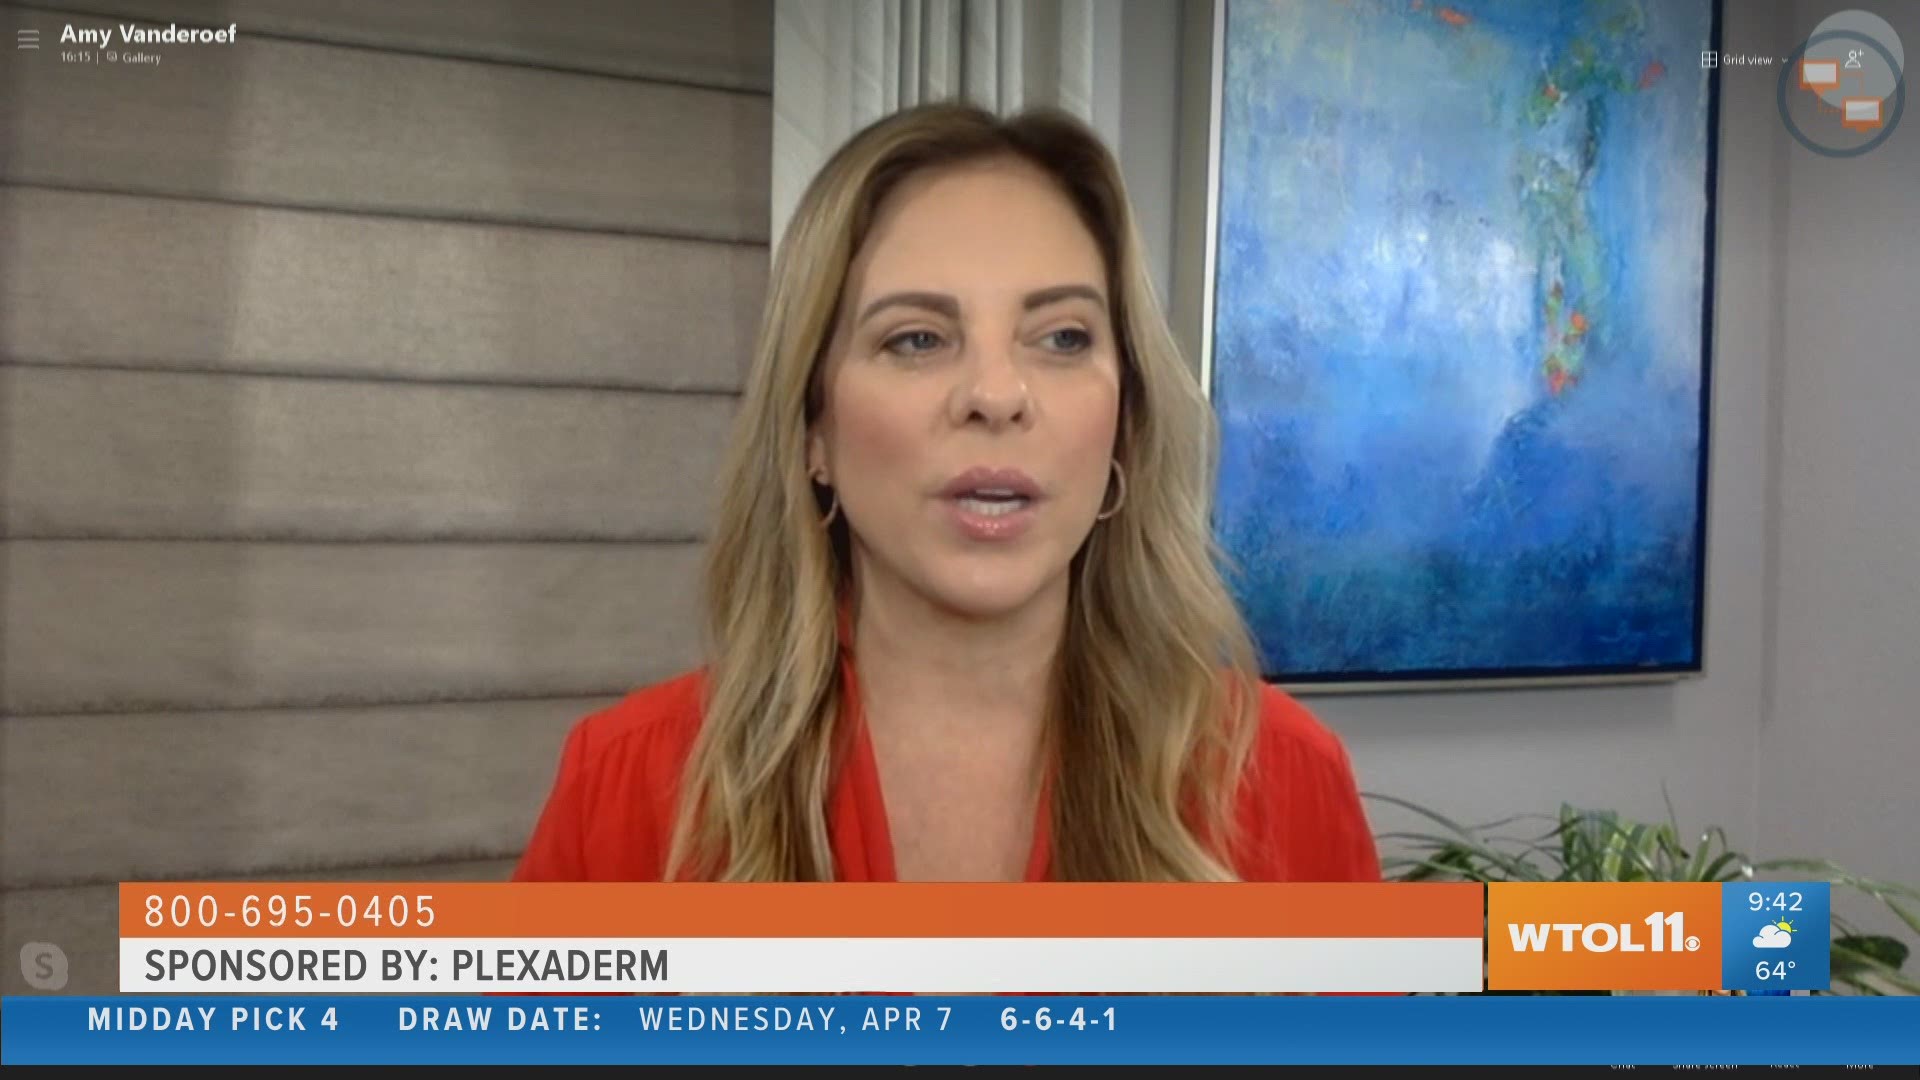 A brighter smile can make you look younger, and you can achieve that with Plexaderm!